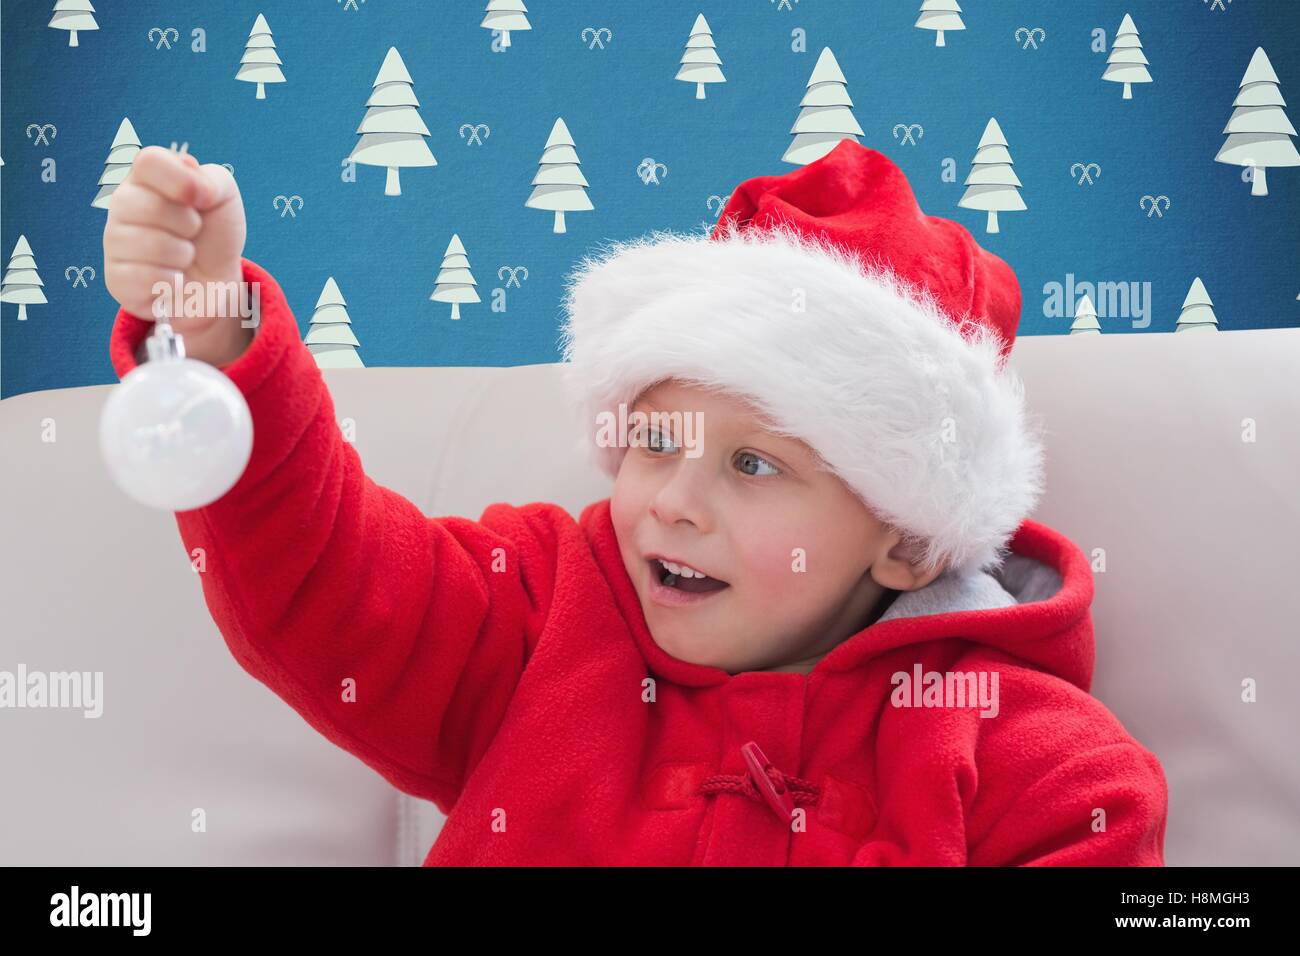 Little boy in santa hat holding a bauble Stock Photo